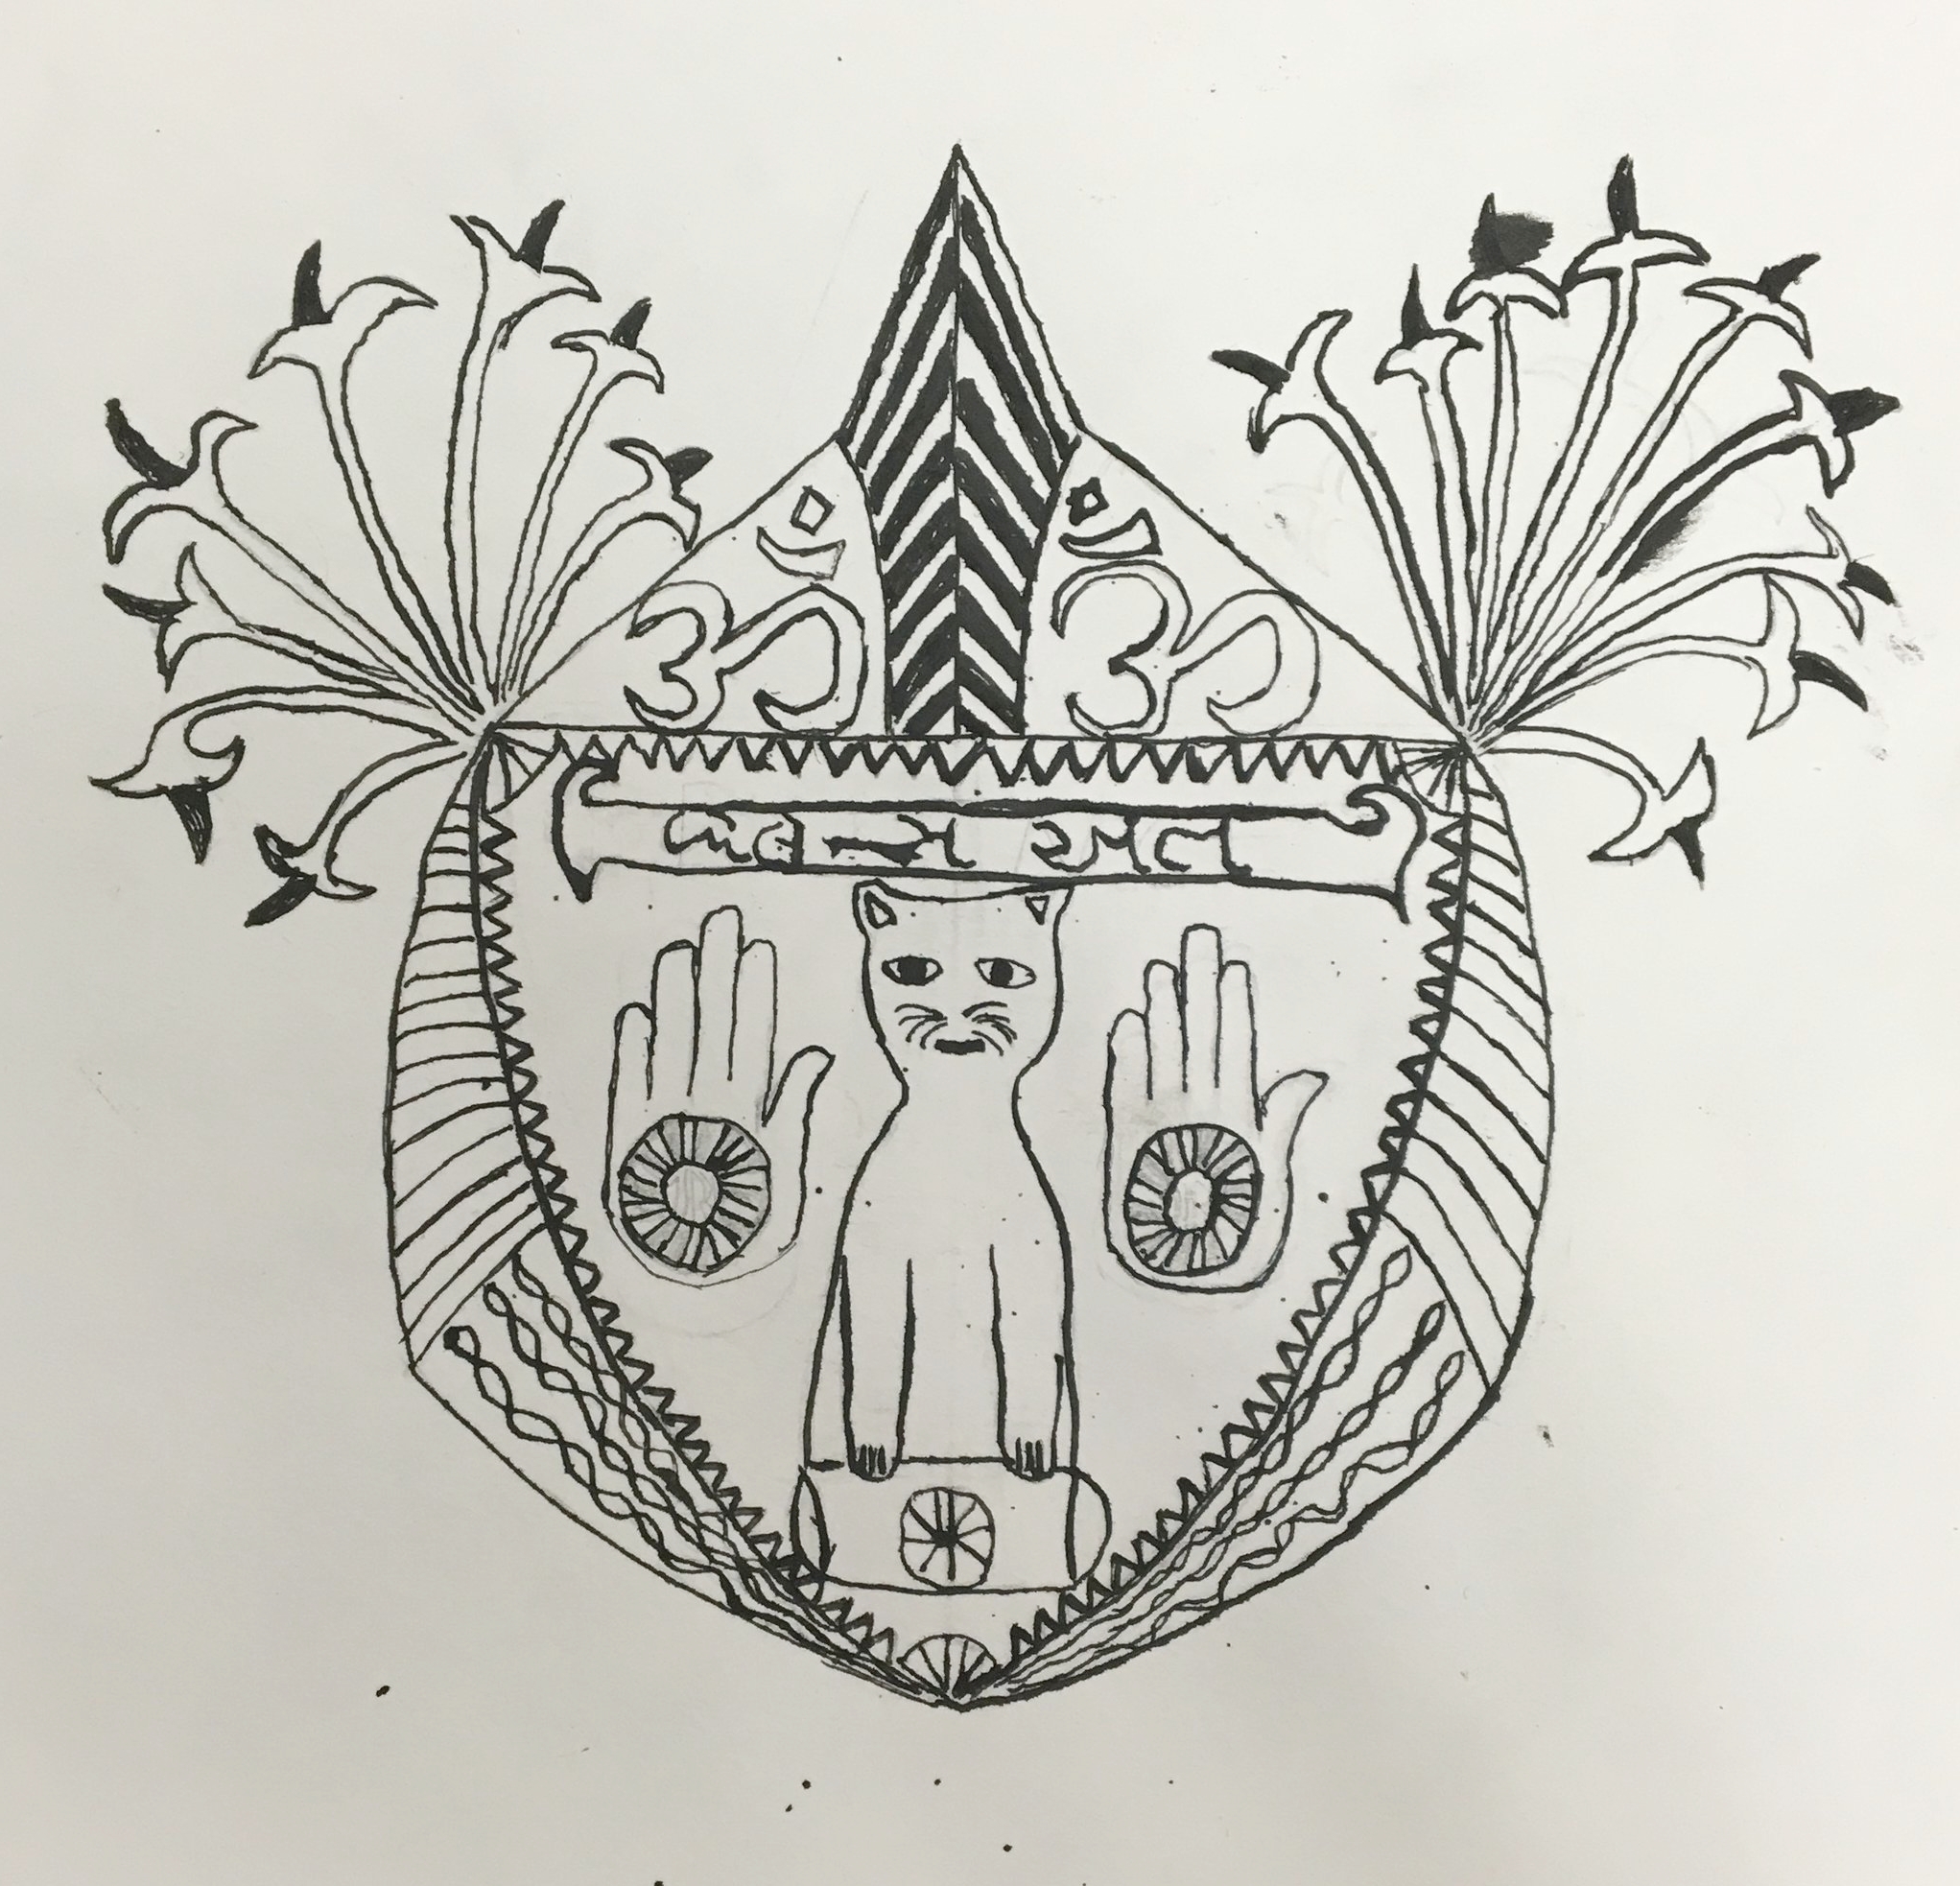  Personal coat of arms | 11th grade 